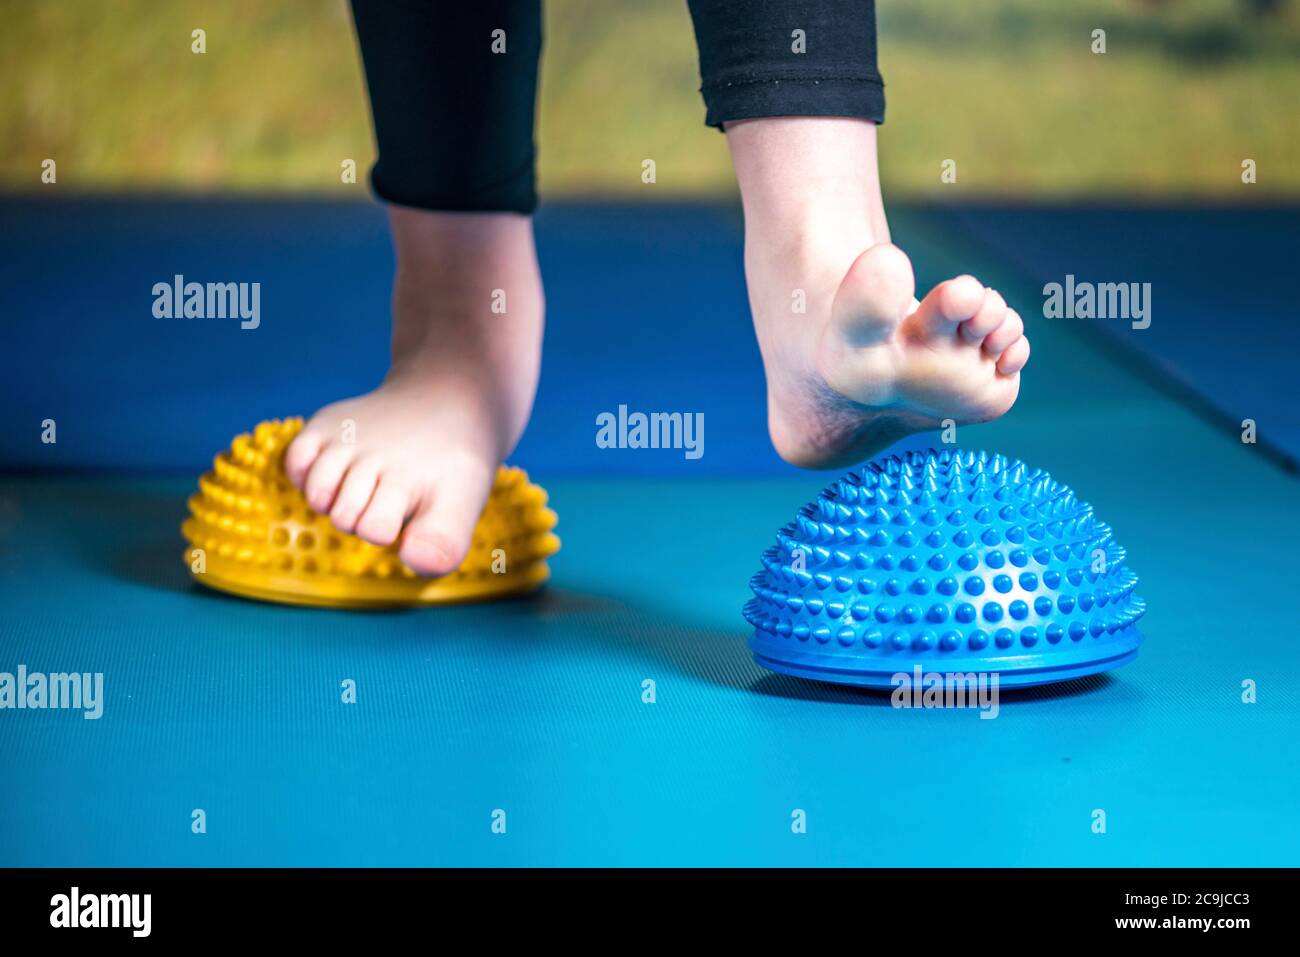 Physical therapy tools for flat feet. Balance pod Stock Photo - Alamy